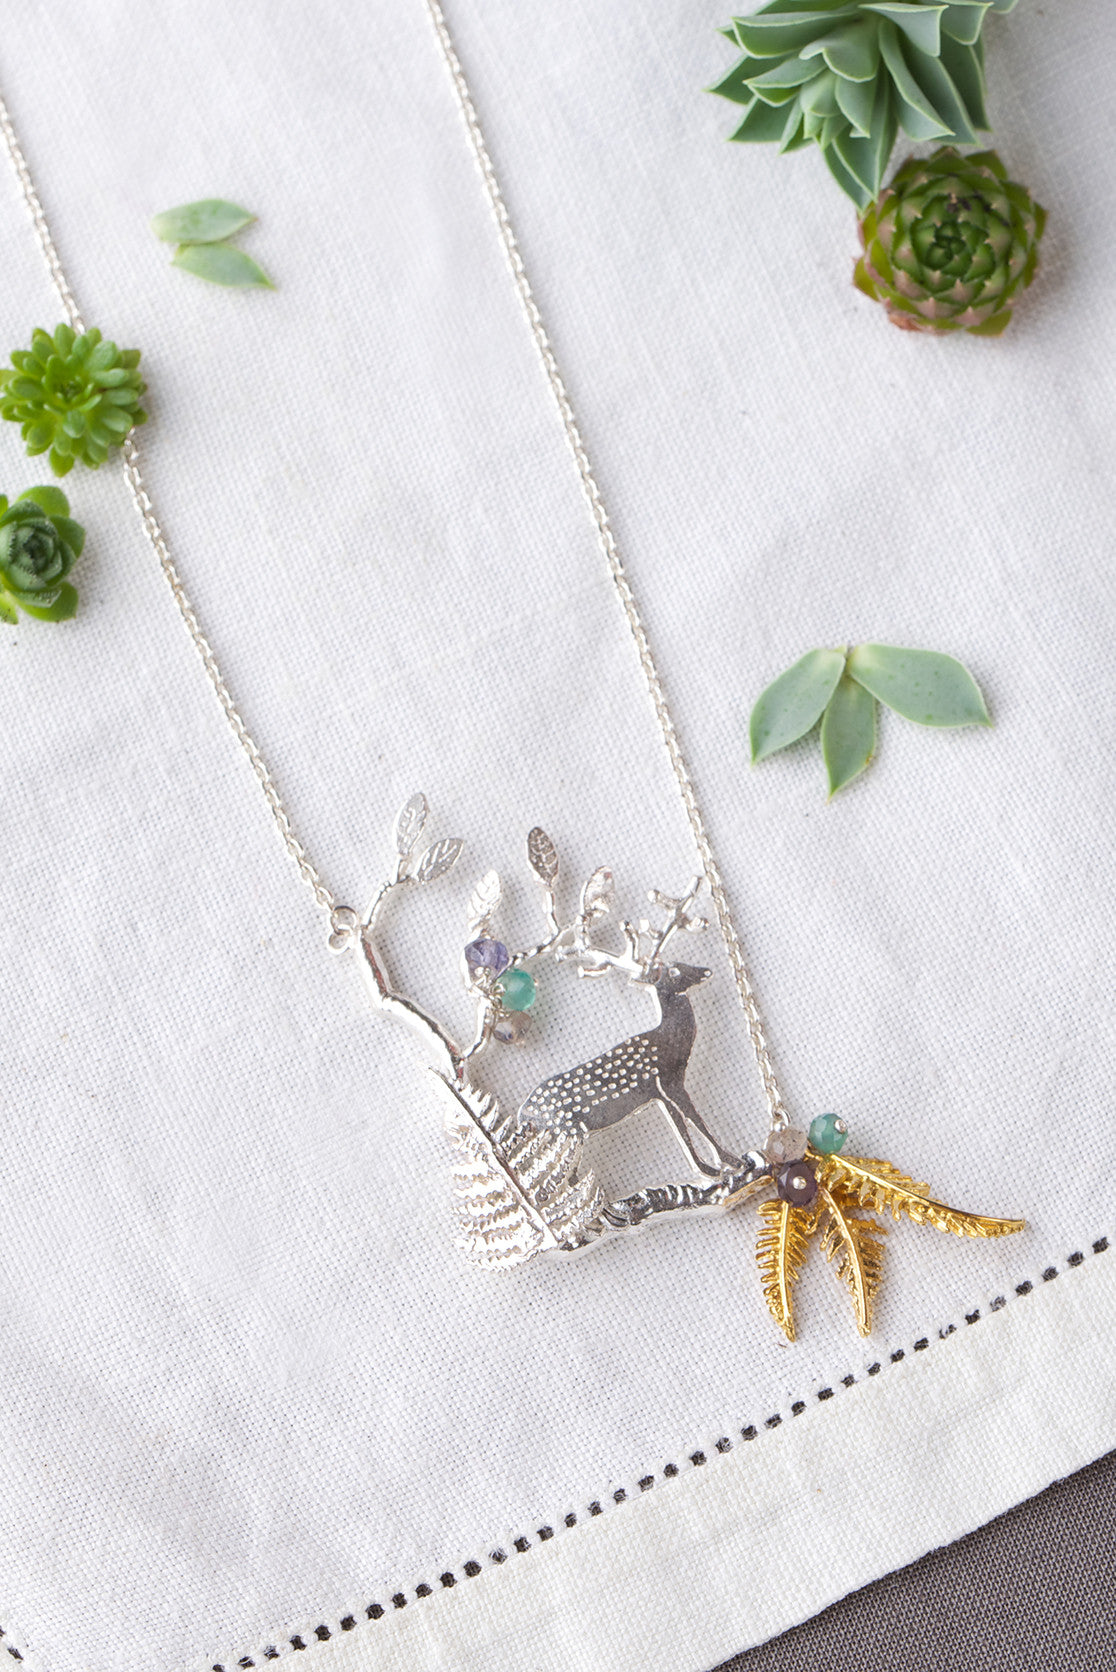 Enchanted Forest Necklace